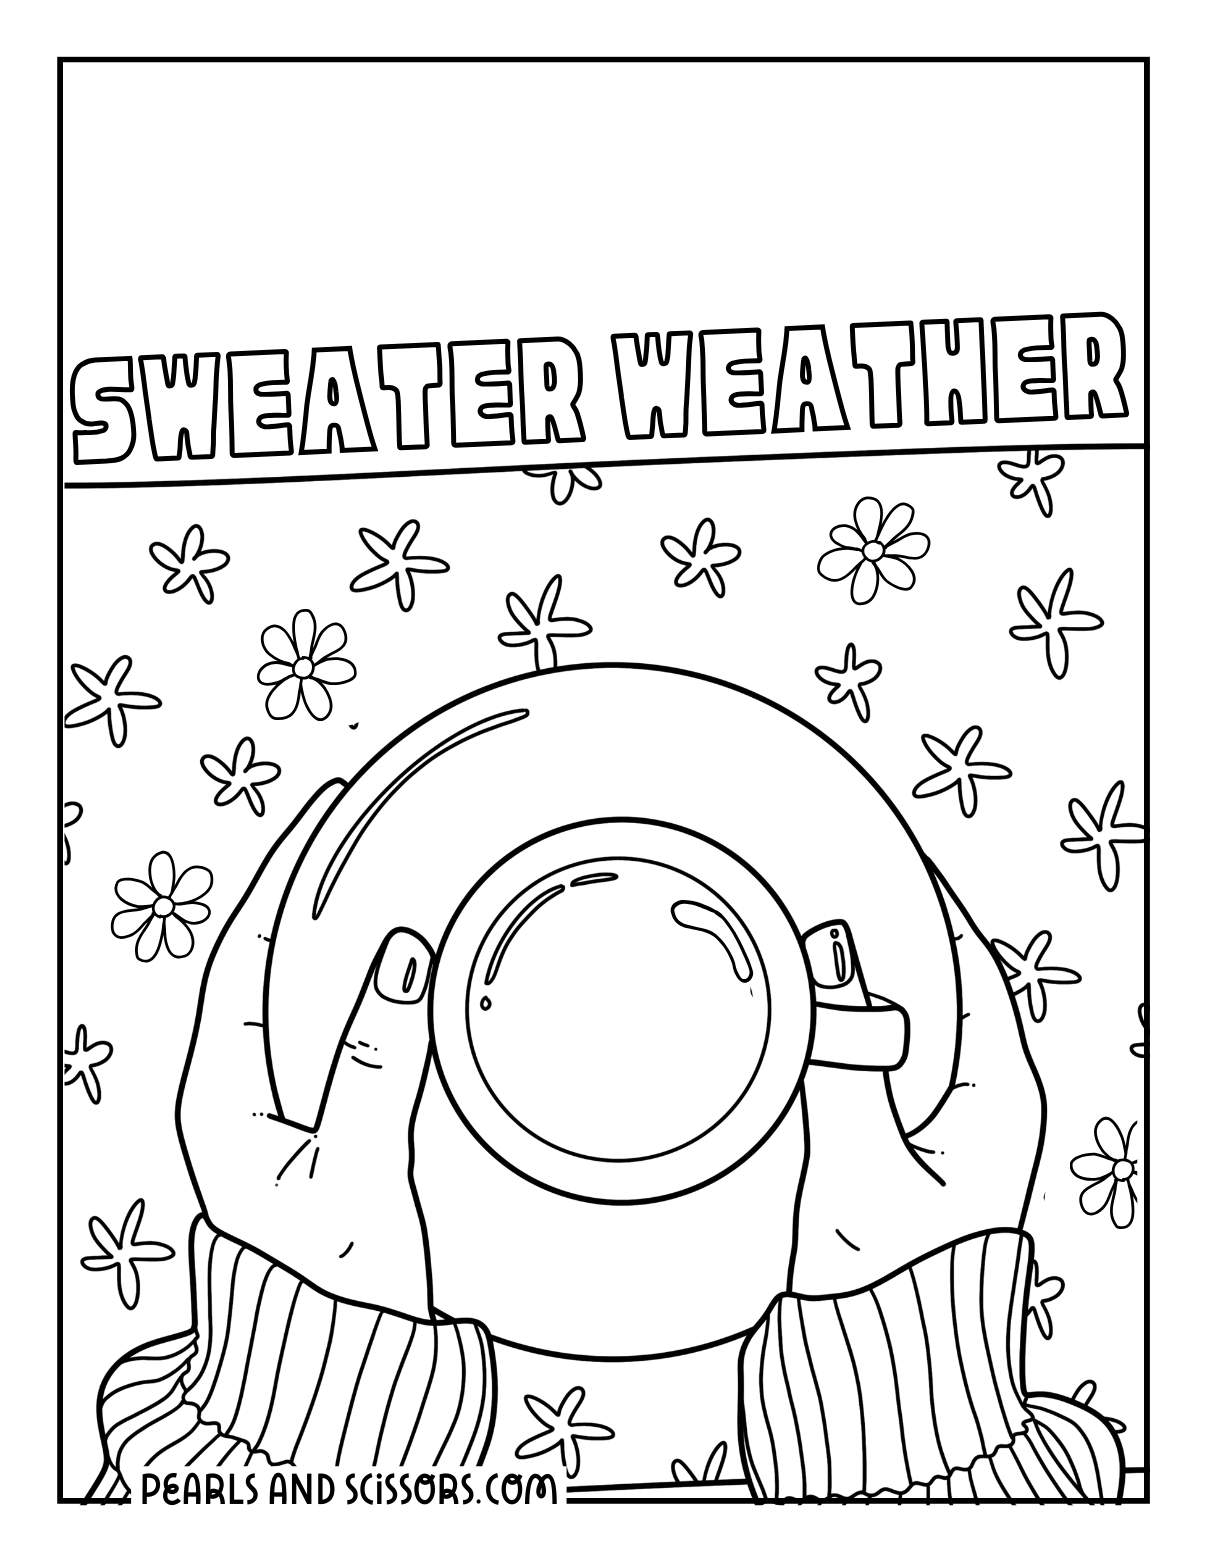 Cozy quiet time and sweater weather with a cup of tea winter coloring page.